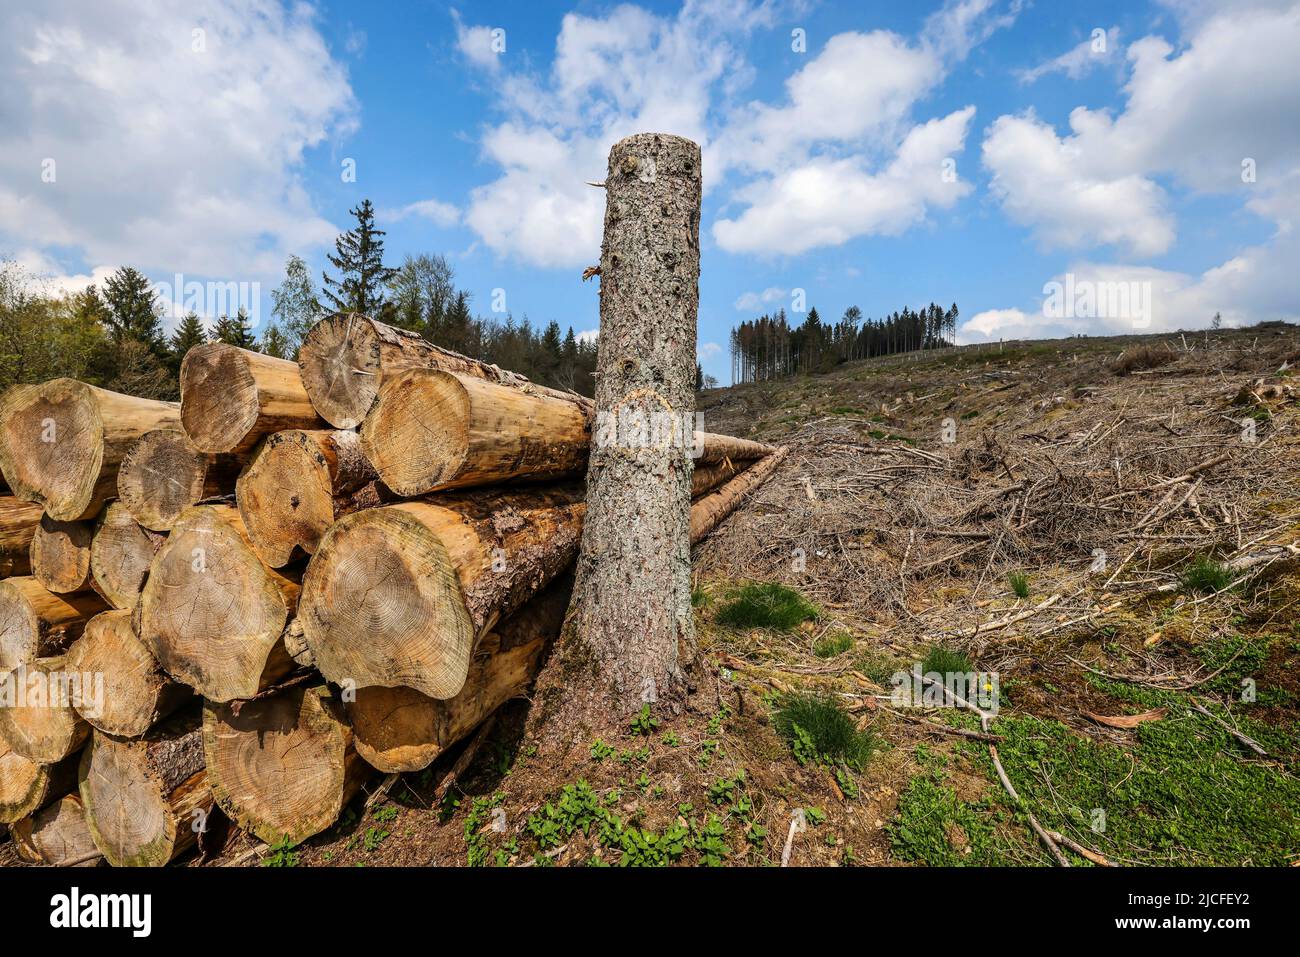 04/27/2022, Hilchenbach, North Rhine-Westphalia, Germany - Forest dieback in the district of Siegen-Wittgenstein in Sauerland, drought and bark beetle damage spruce trees in coniferous forest. Dead spruce forests were felled. Stock Photo